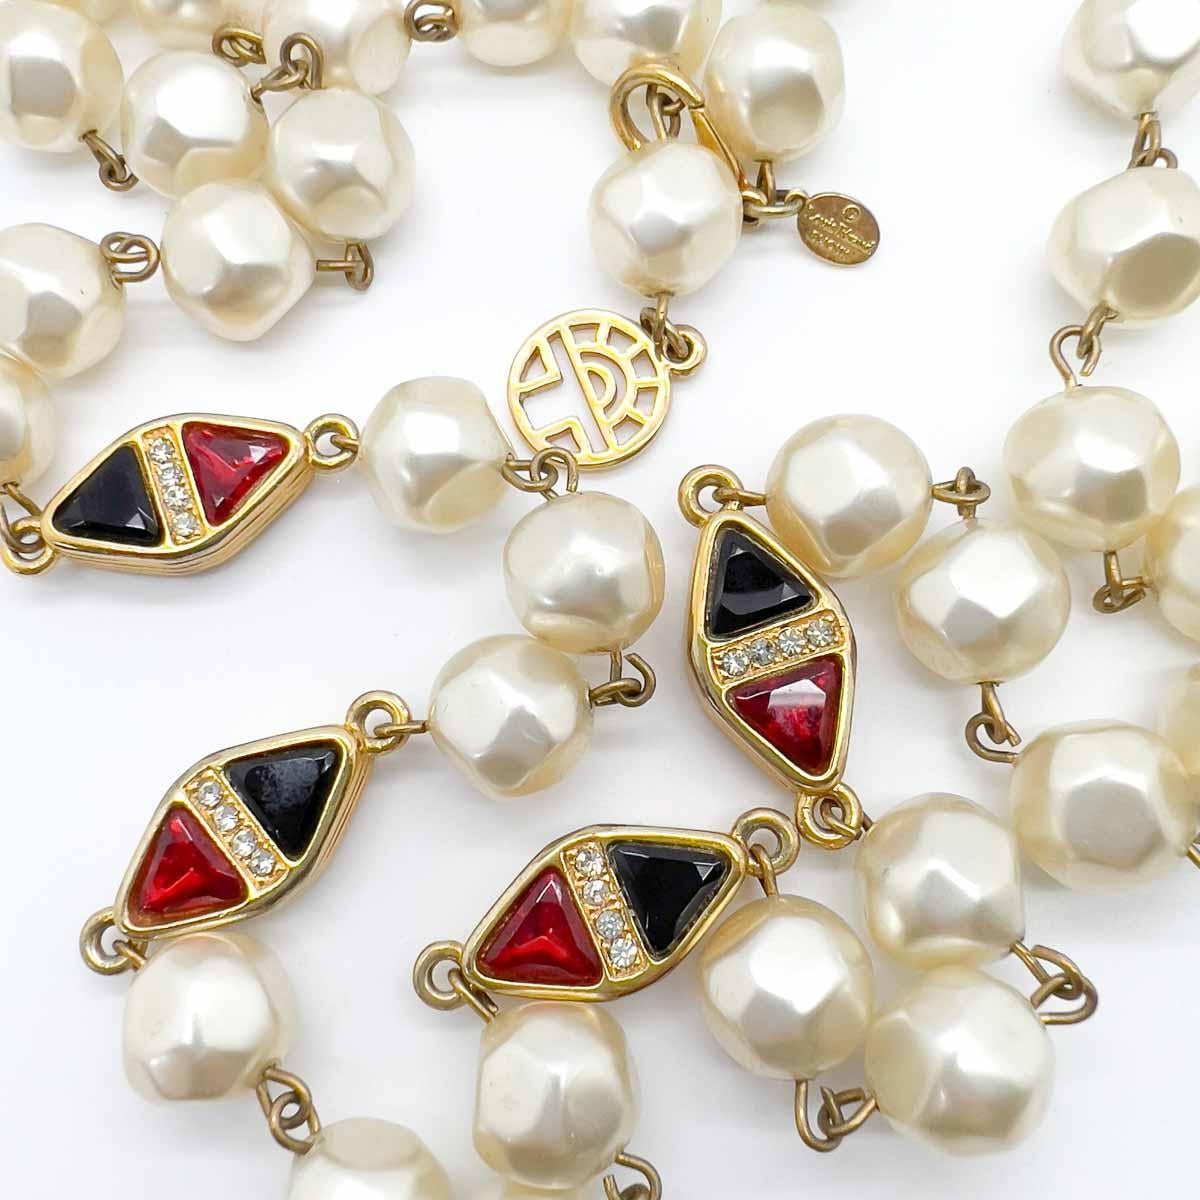 A Vintage Louis Féraud Pearl Necklace. Baroque inspired pearls punctuated with jewelled stations. Each station set with fancy cut crystals in ruby red and black finished with a row of tiny chatons. A perfectly timeless piece that oozes